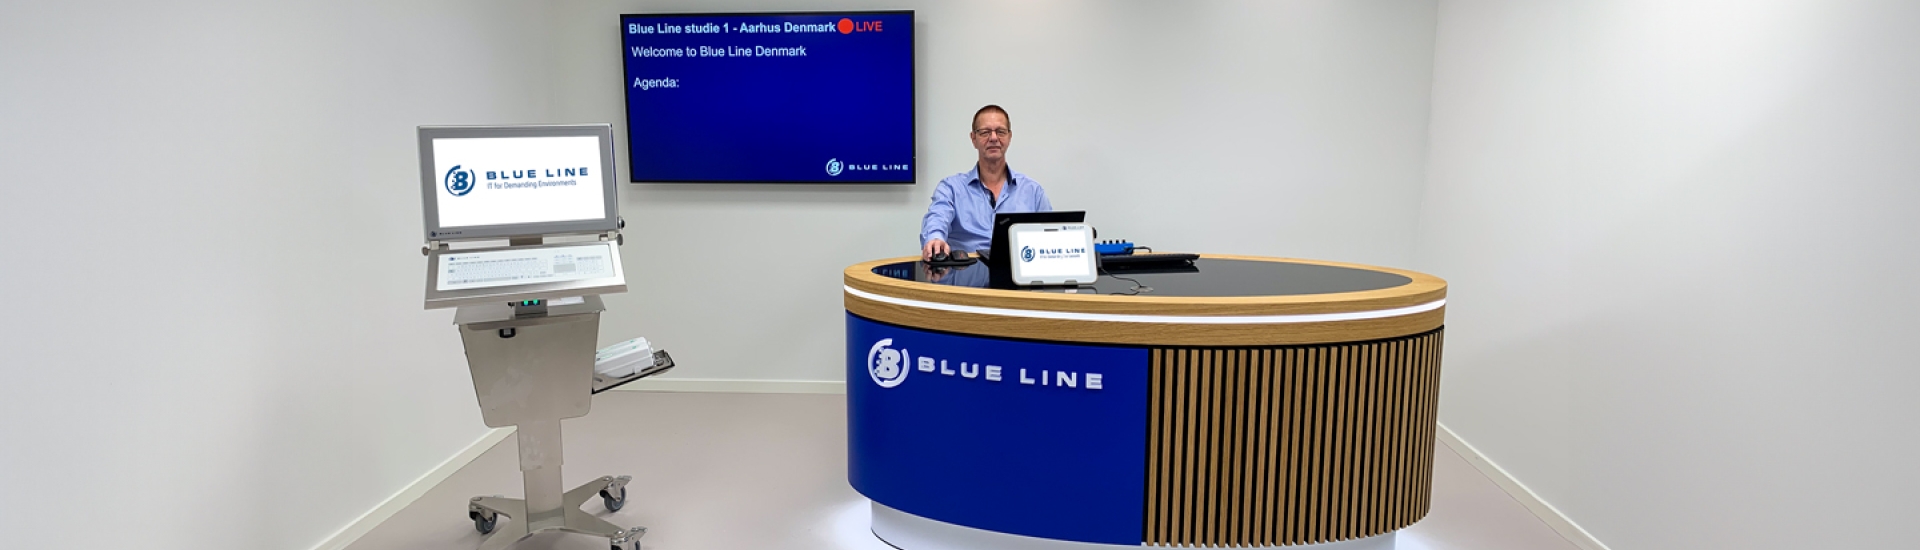 New video studio: Blue Line is ready to meet your needs in a new visual level